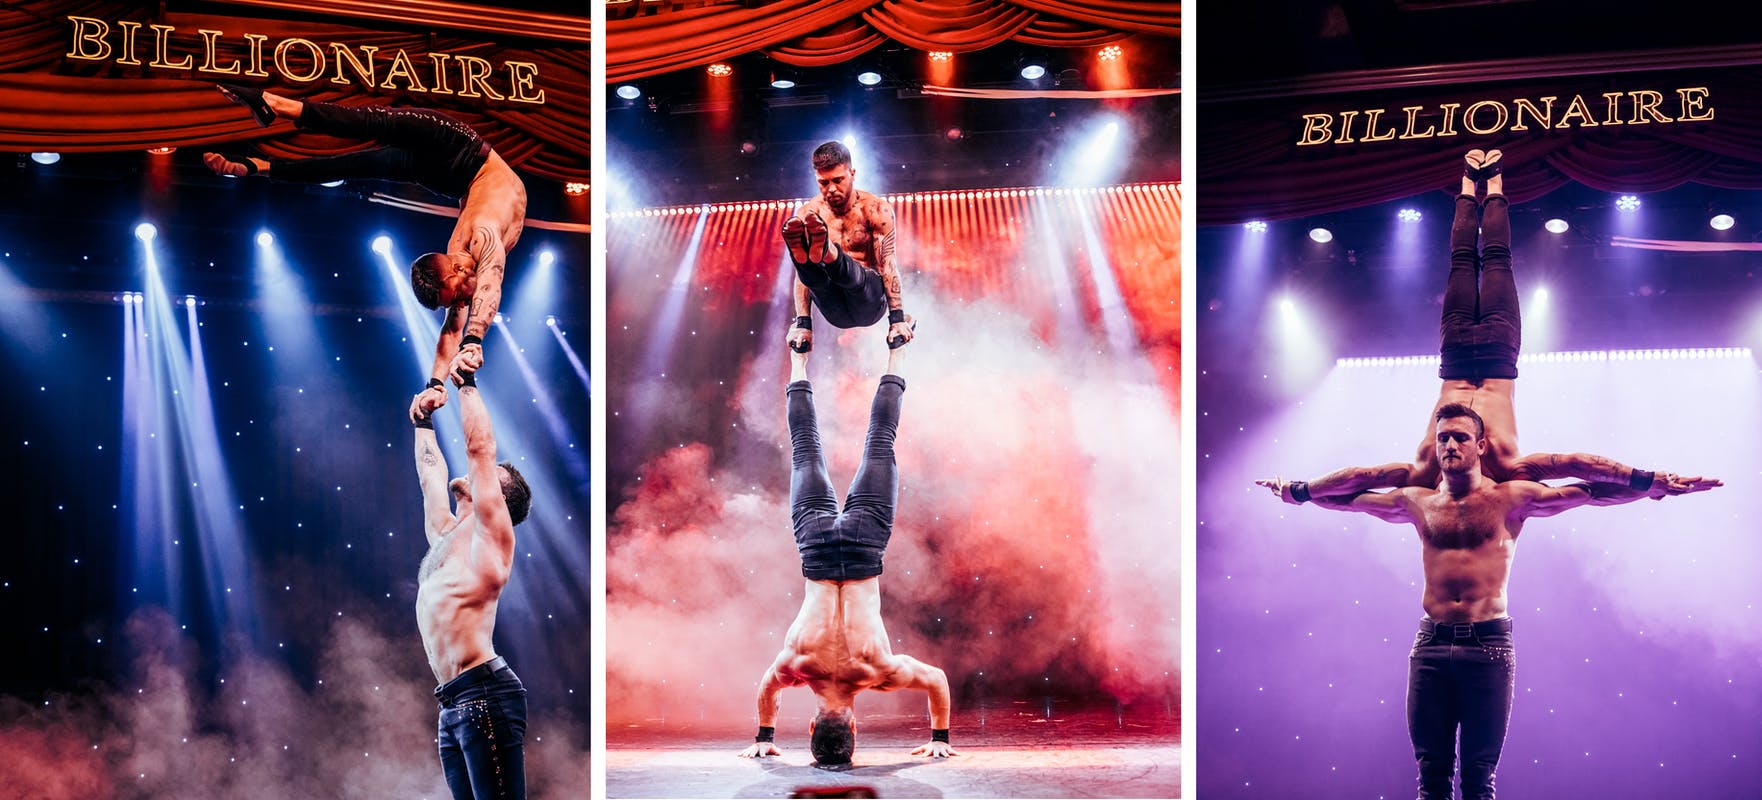 Billionaire Dubai Introduces a Thrilling New Show featuring New  Acrobatic Act, The Lads